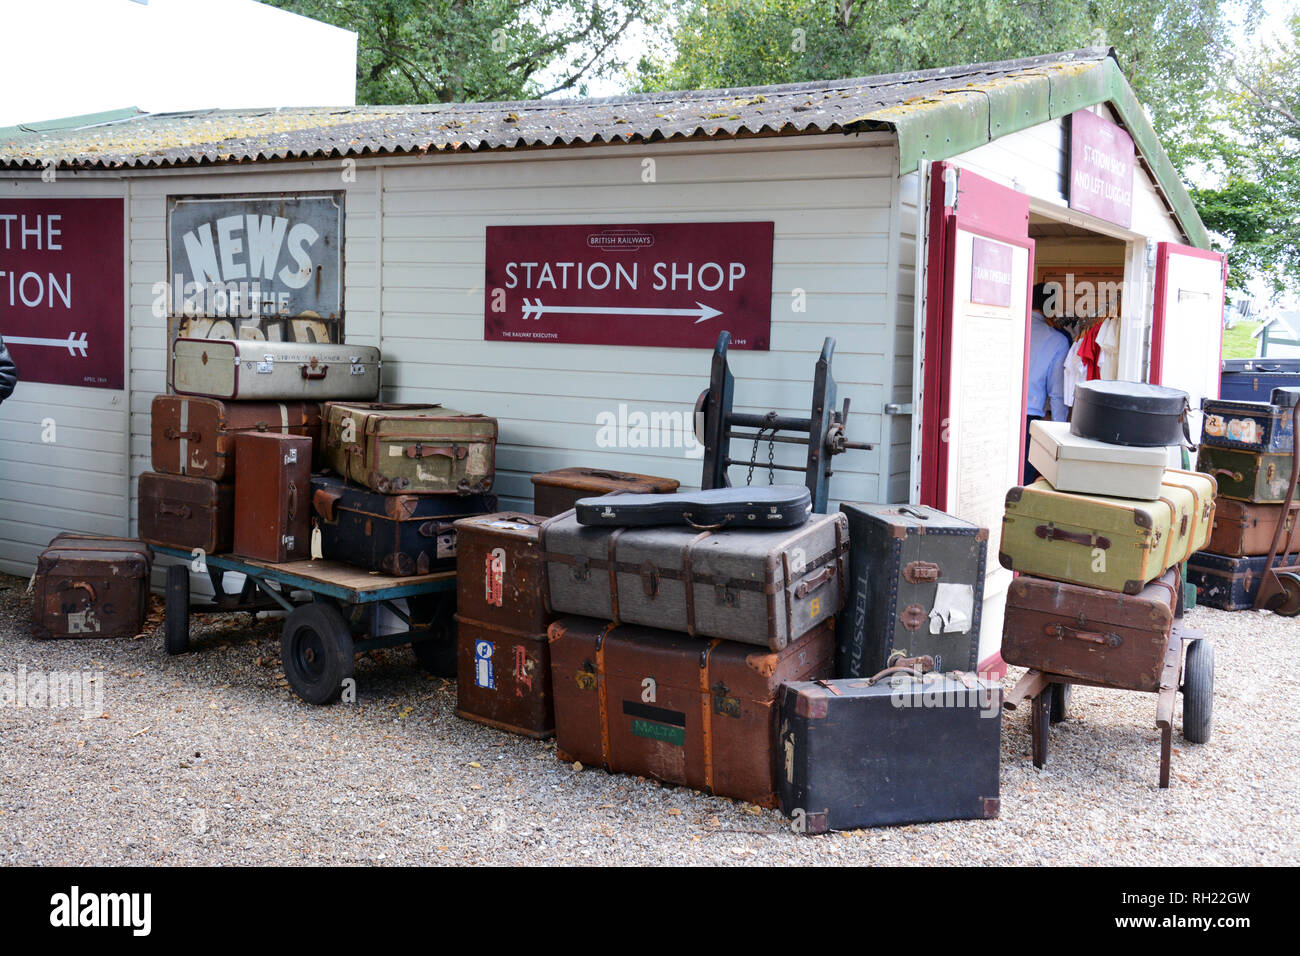 Exterior of period Station Shop set up at Goodwood Revival 7th Sept 2018 Stock Photo